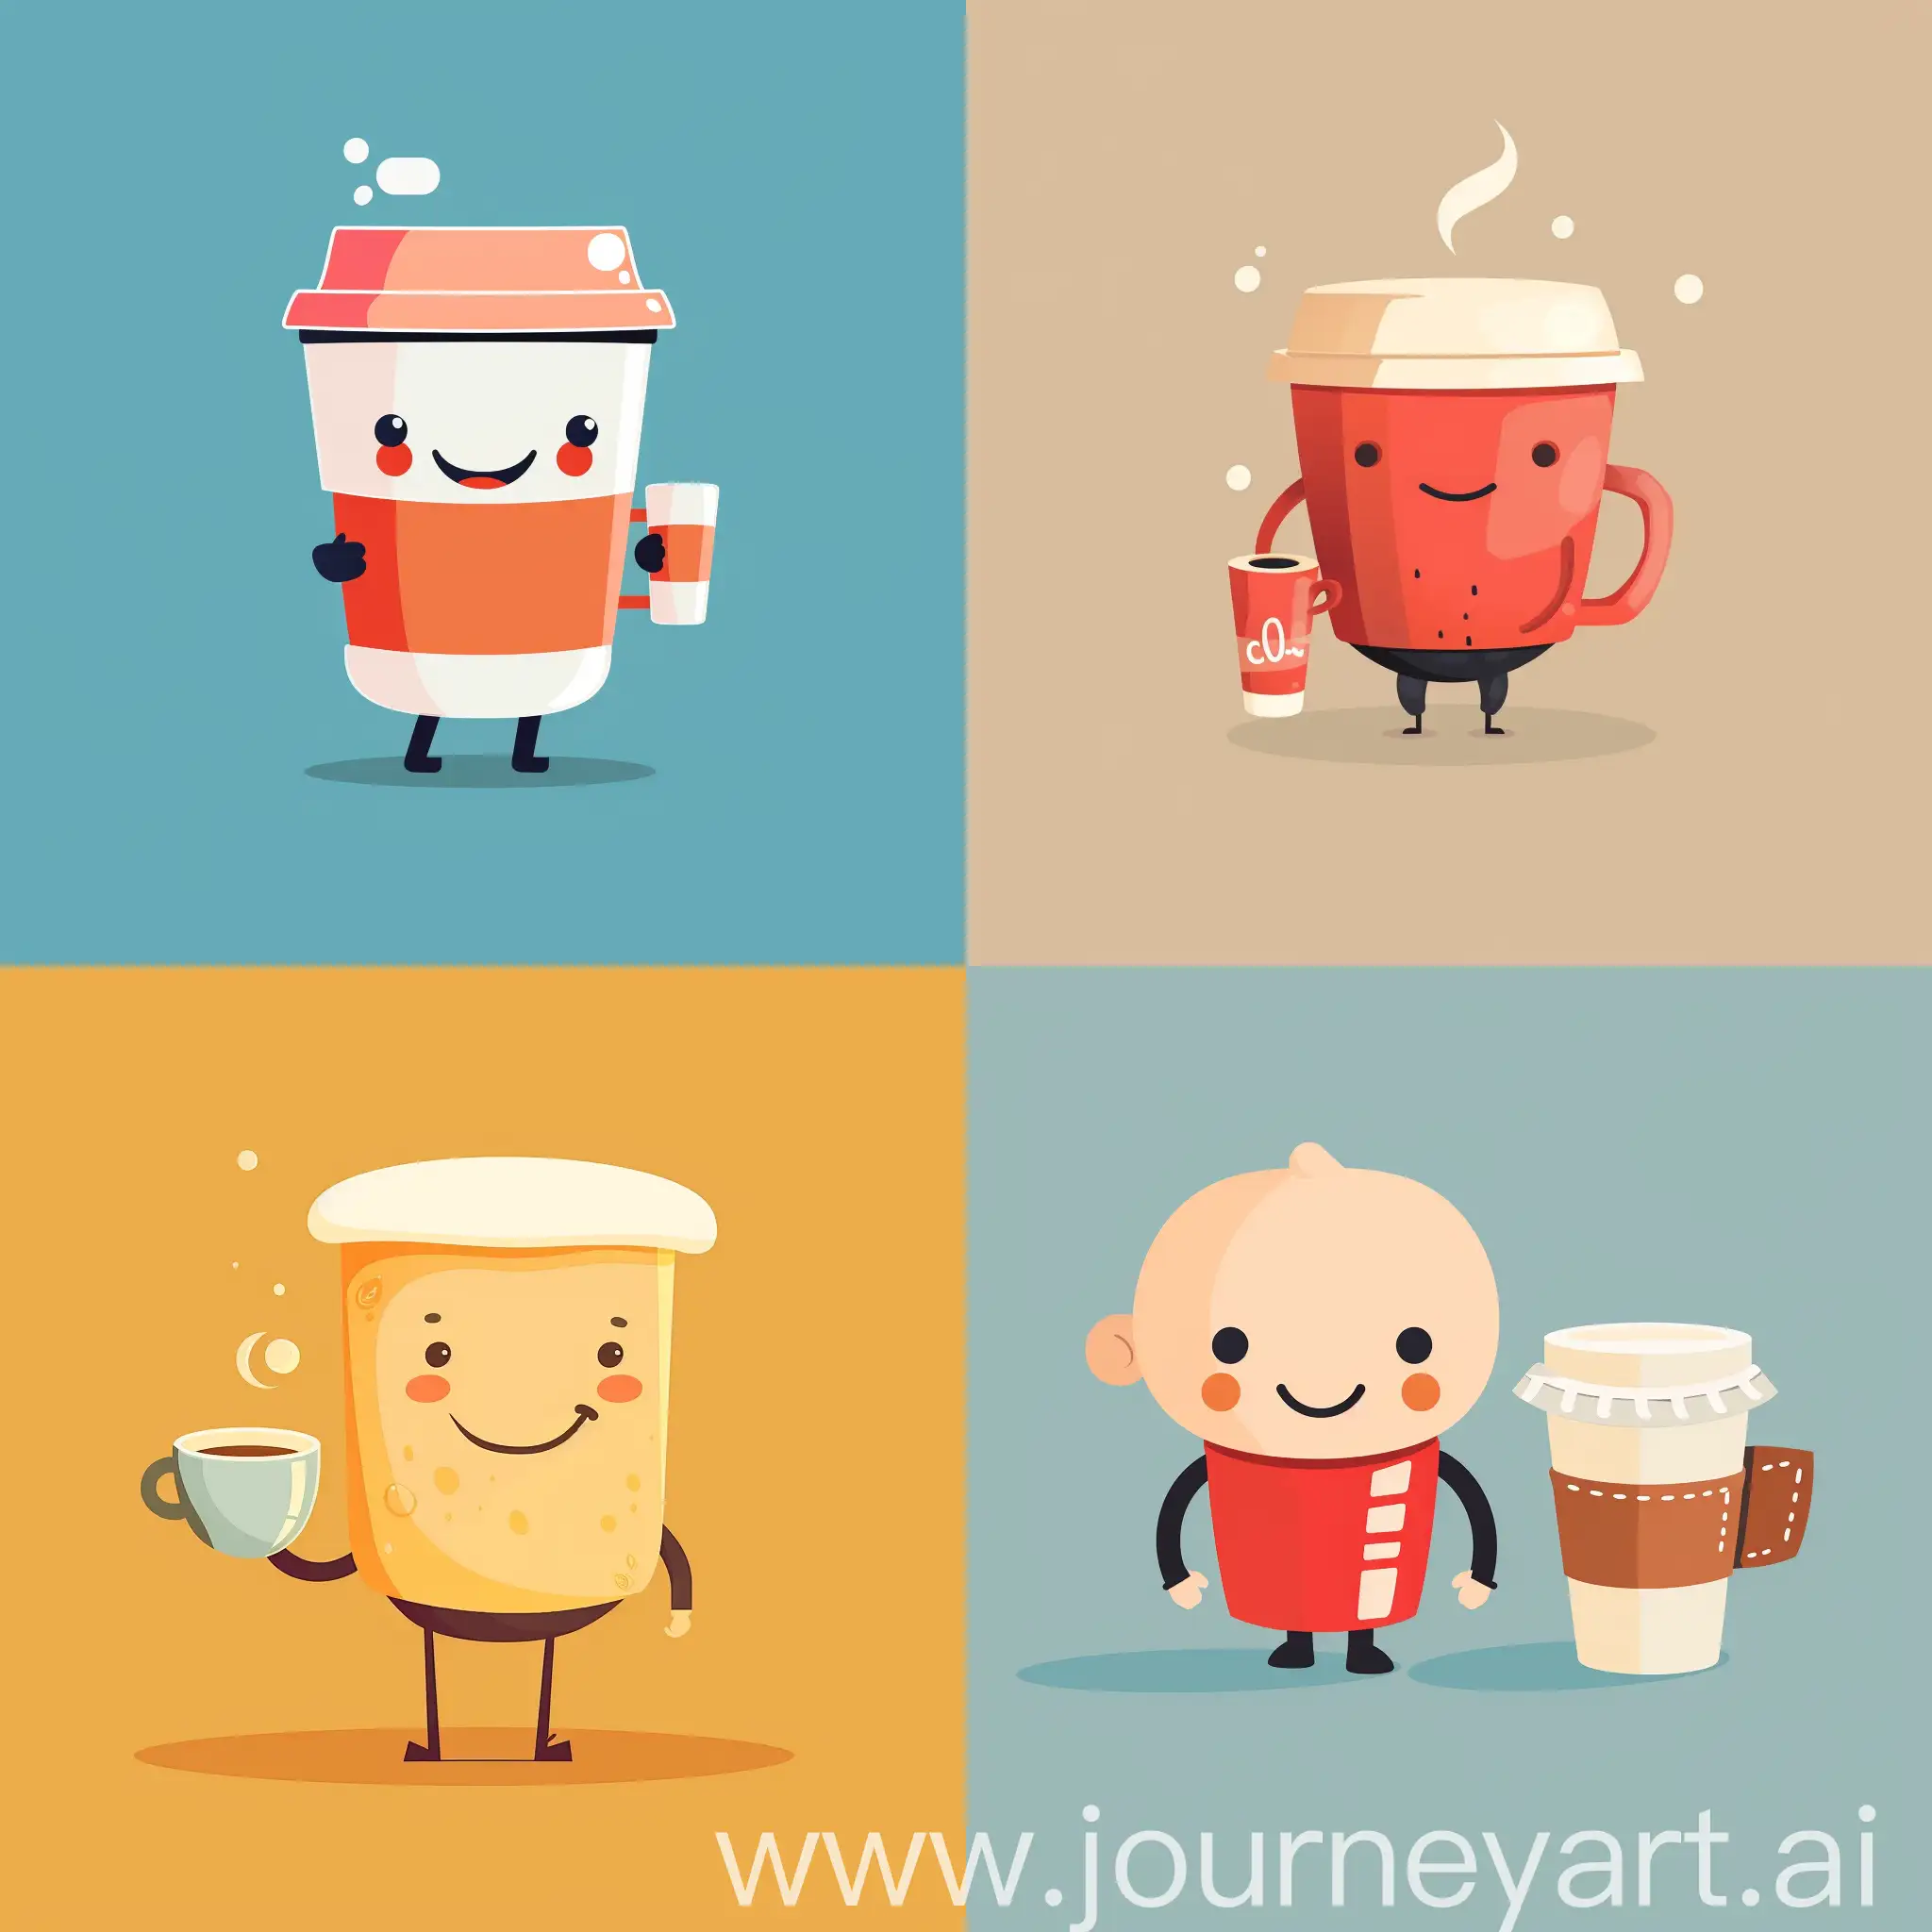 Adorable-Cartoon-Character-Enjoying-Coffee-in-HighQuality-Flat-Style